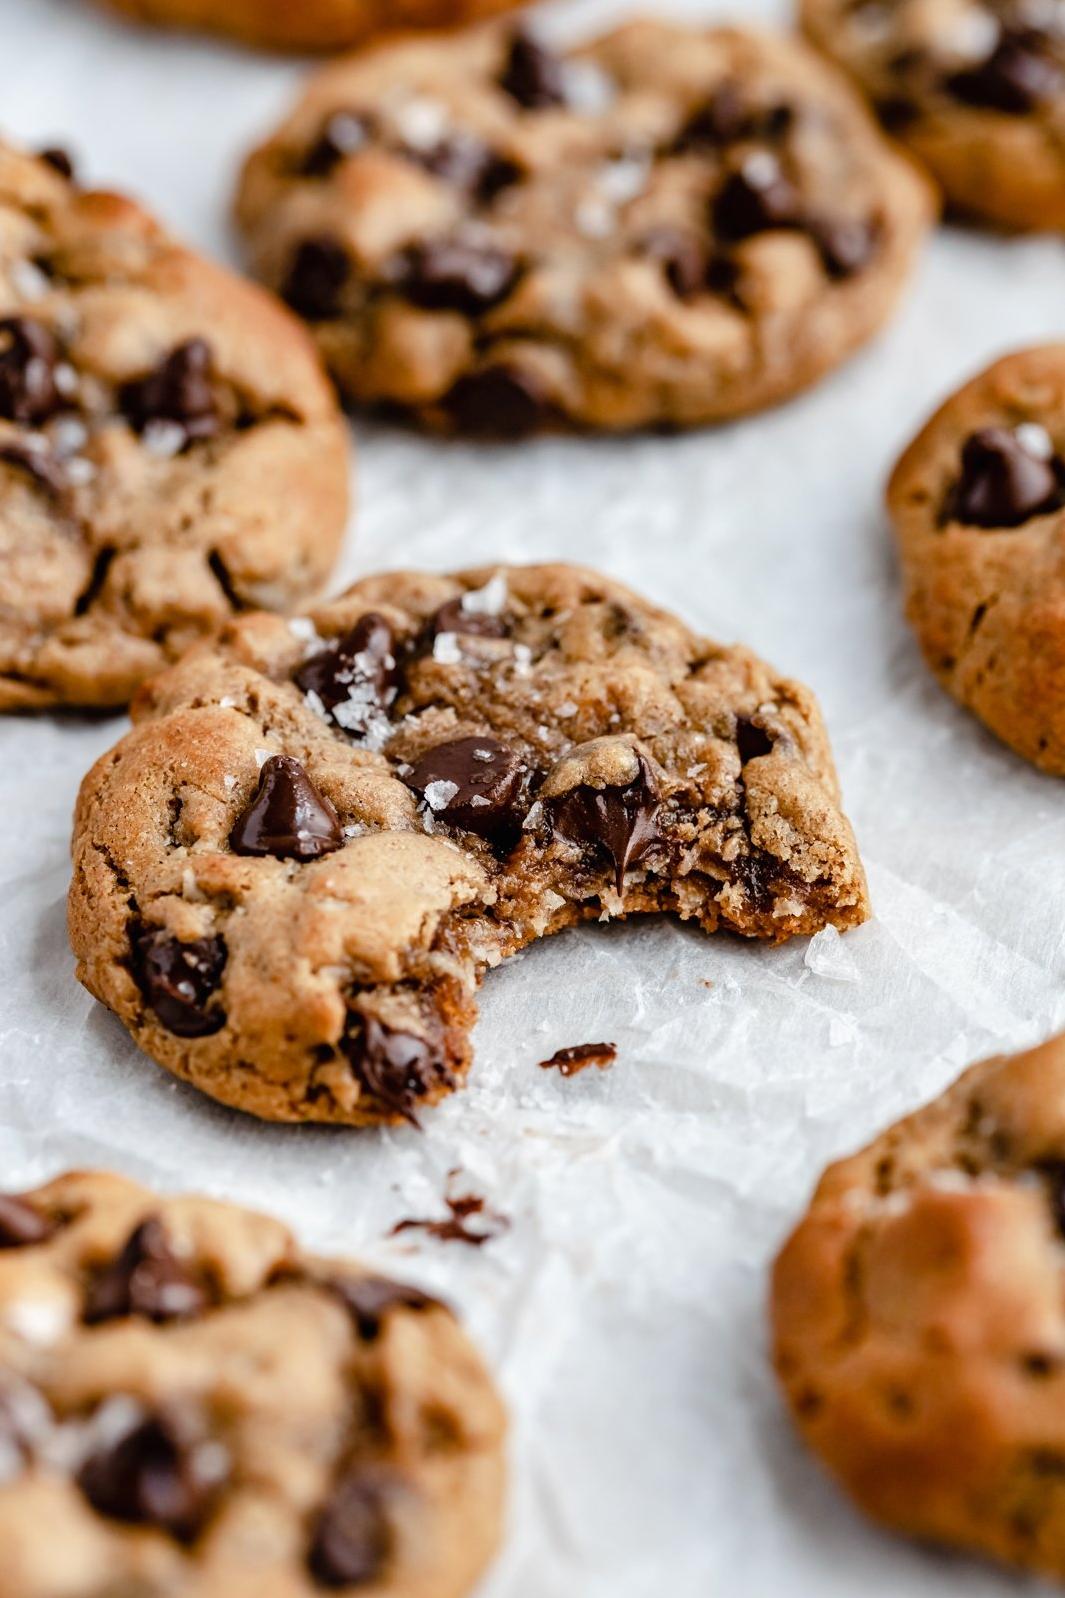  With a dash of cinnamon and a sprinkle of chocolate chips, these cookies are sure to be a hit!